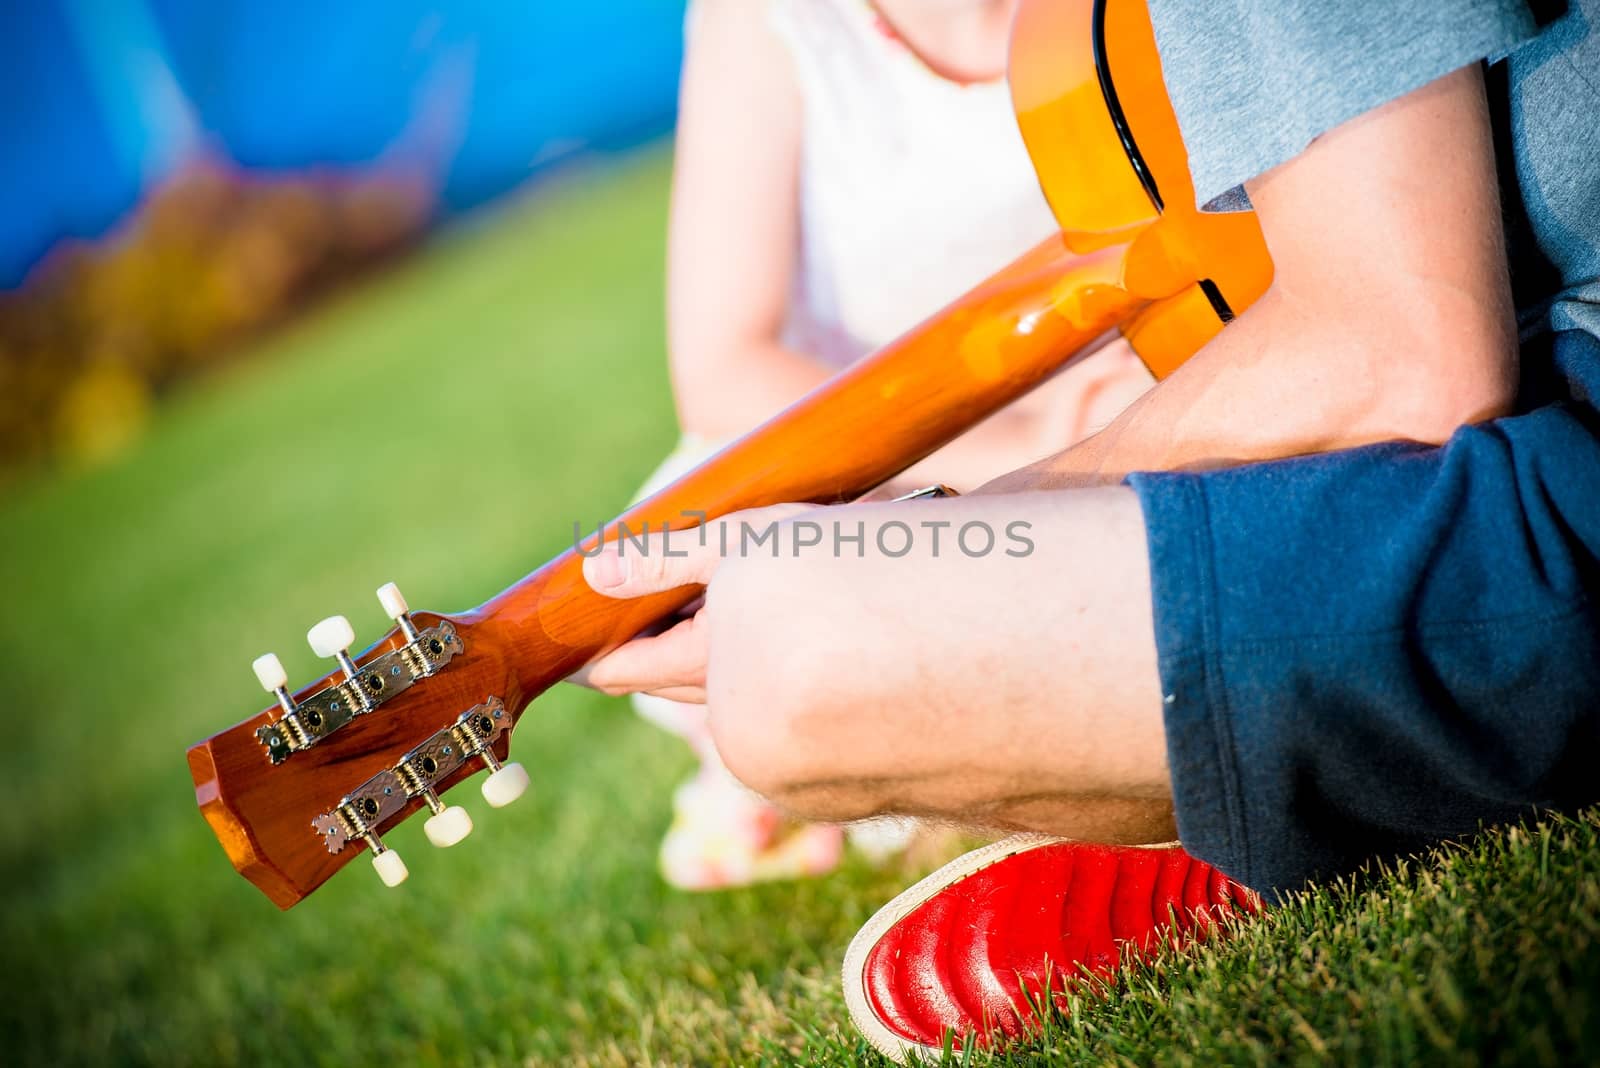 Dad Playing Guitar For His Daughter While Seating on the Backyard Grass. Backyard Fun Time.